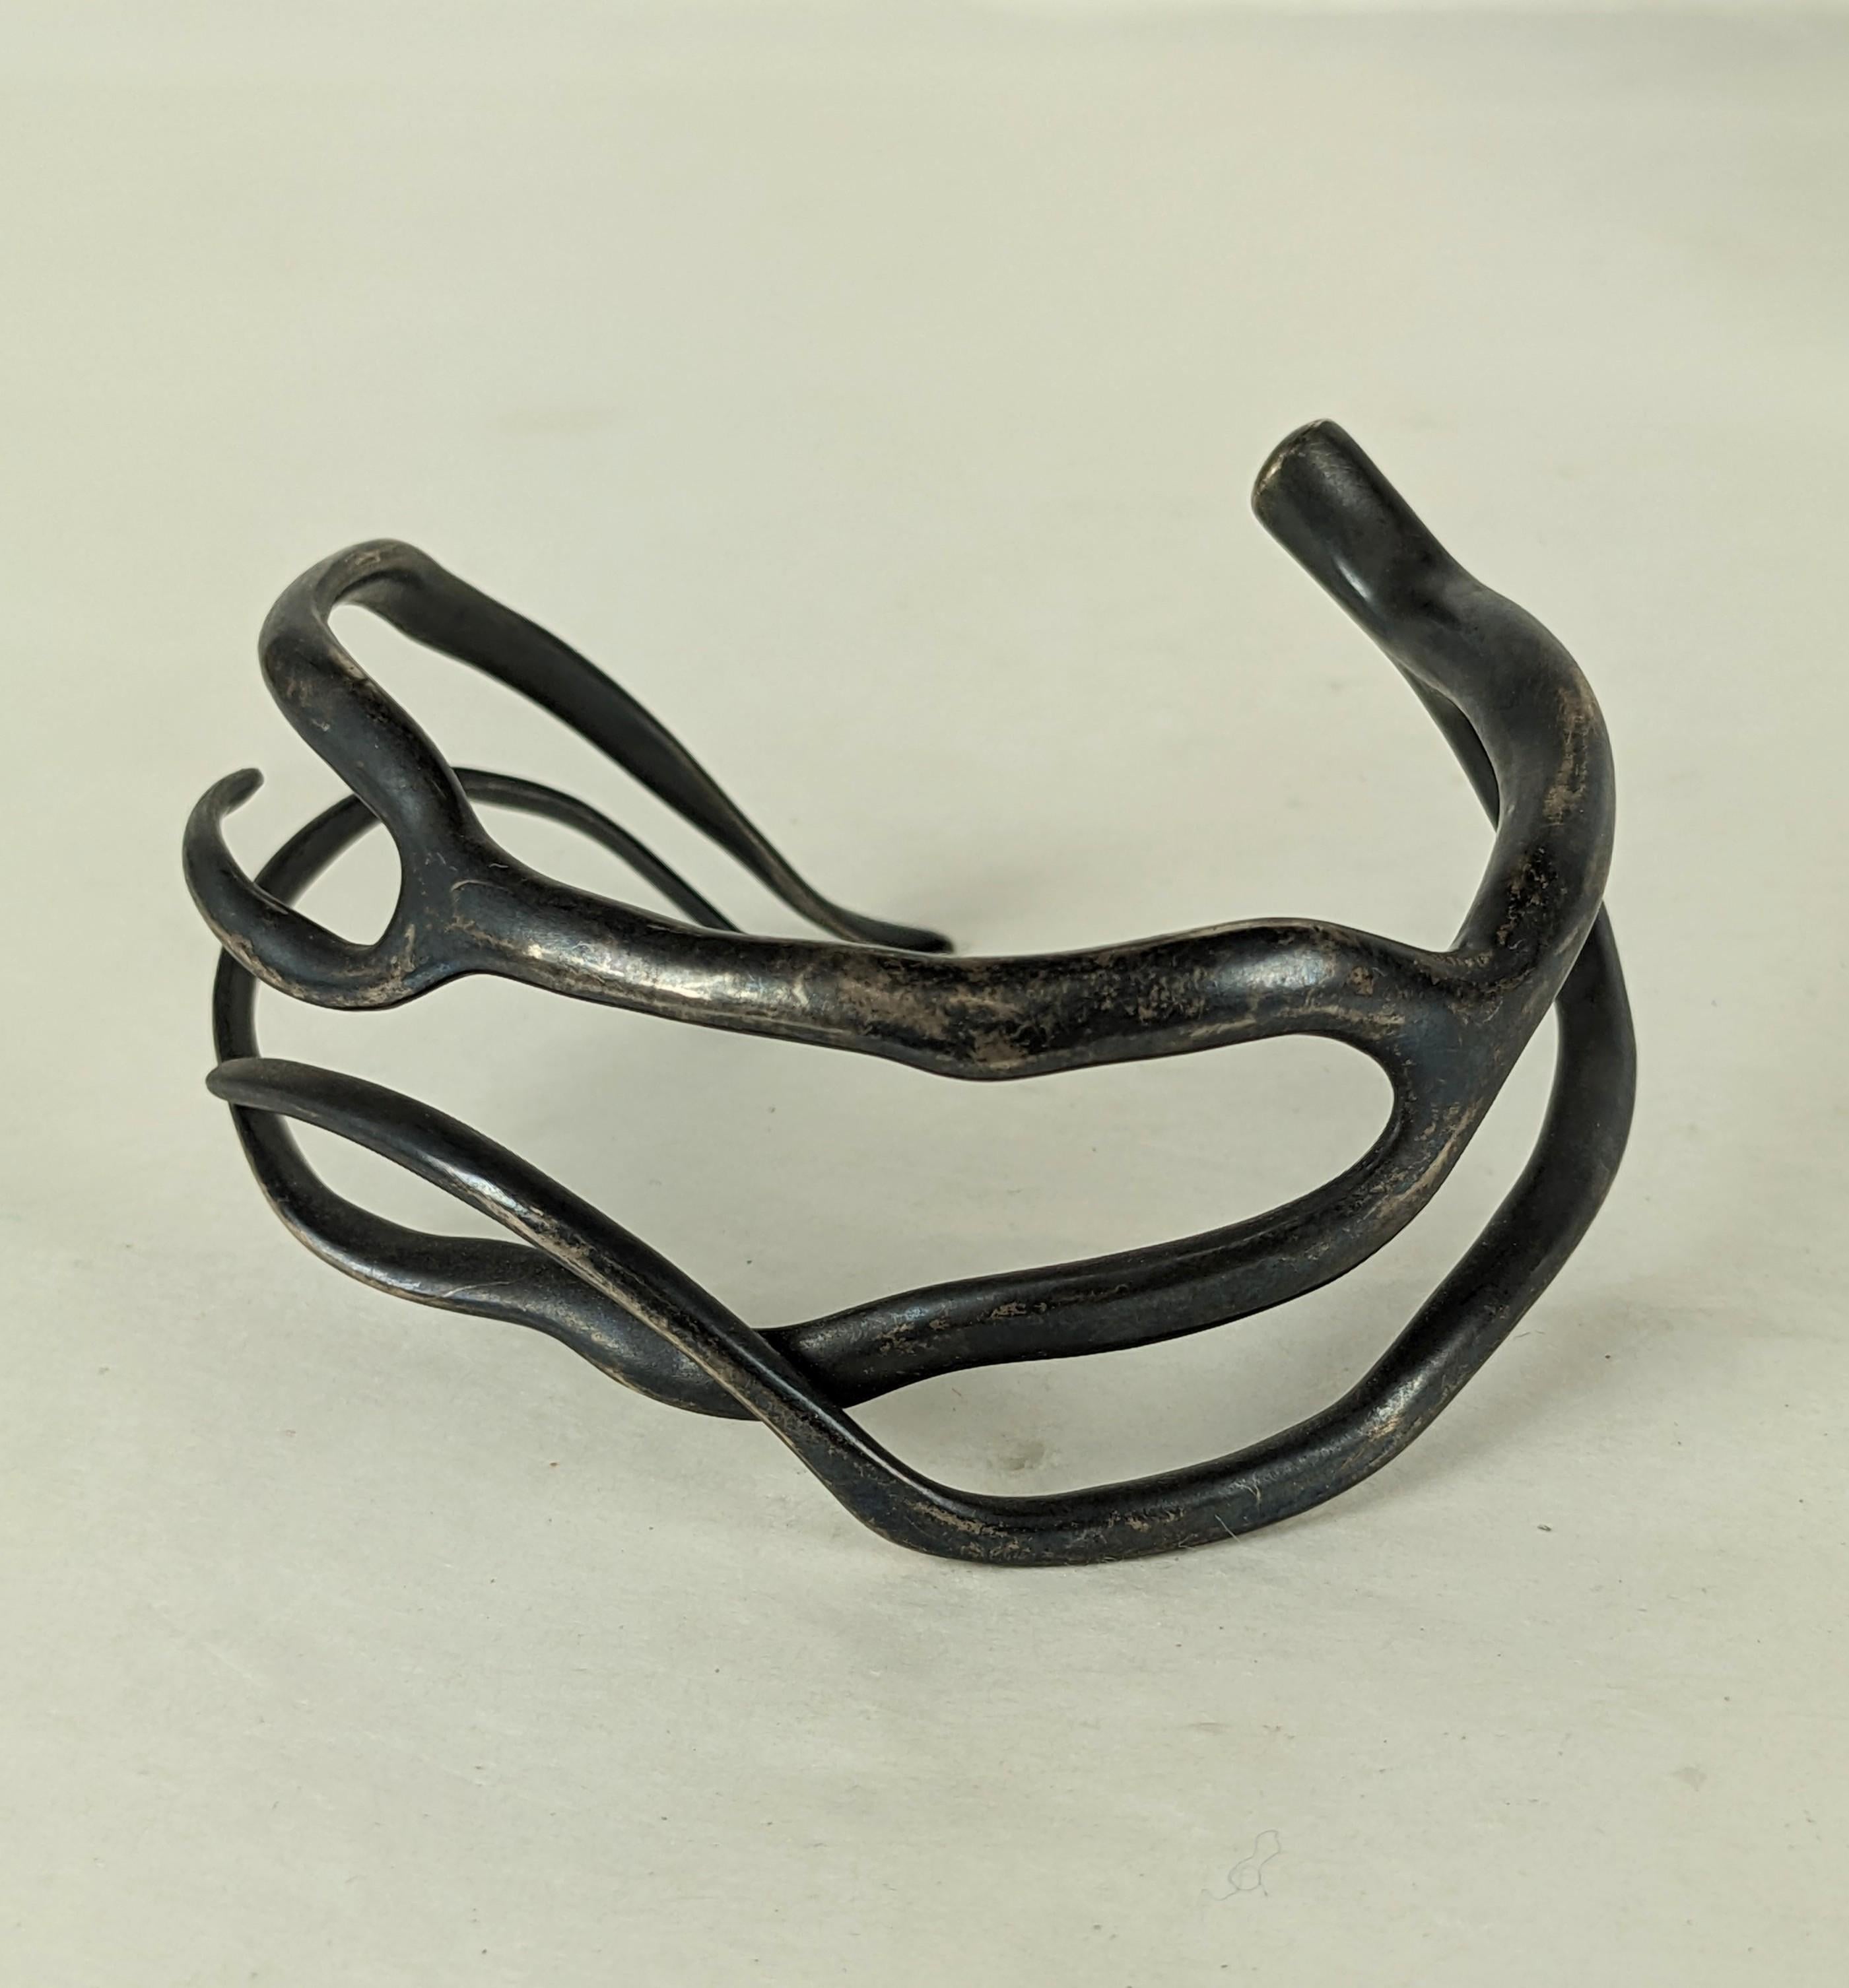 Stunning Patinaed Sterling Branch Cuff by Annette Ferdinandsen from the early 2000's. Unmarked but recognized as a design she created. Realistic branch wraps around wrist in an ergonomic way. 